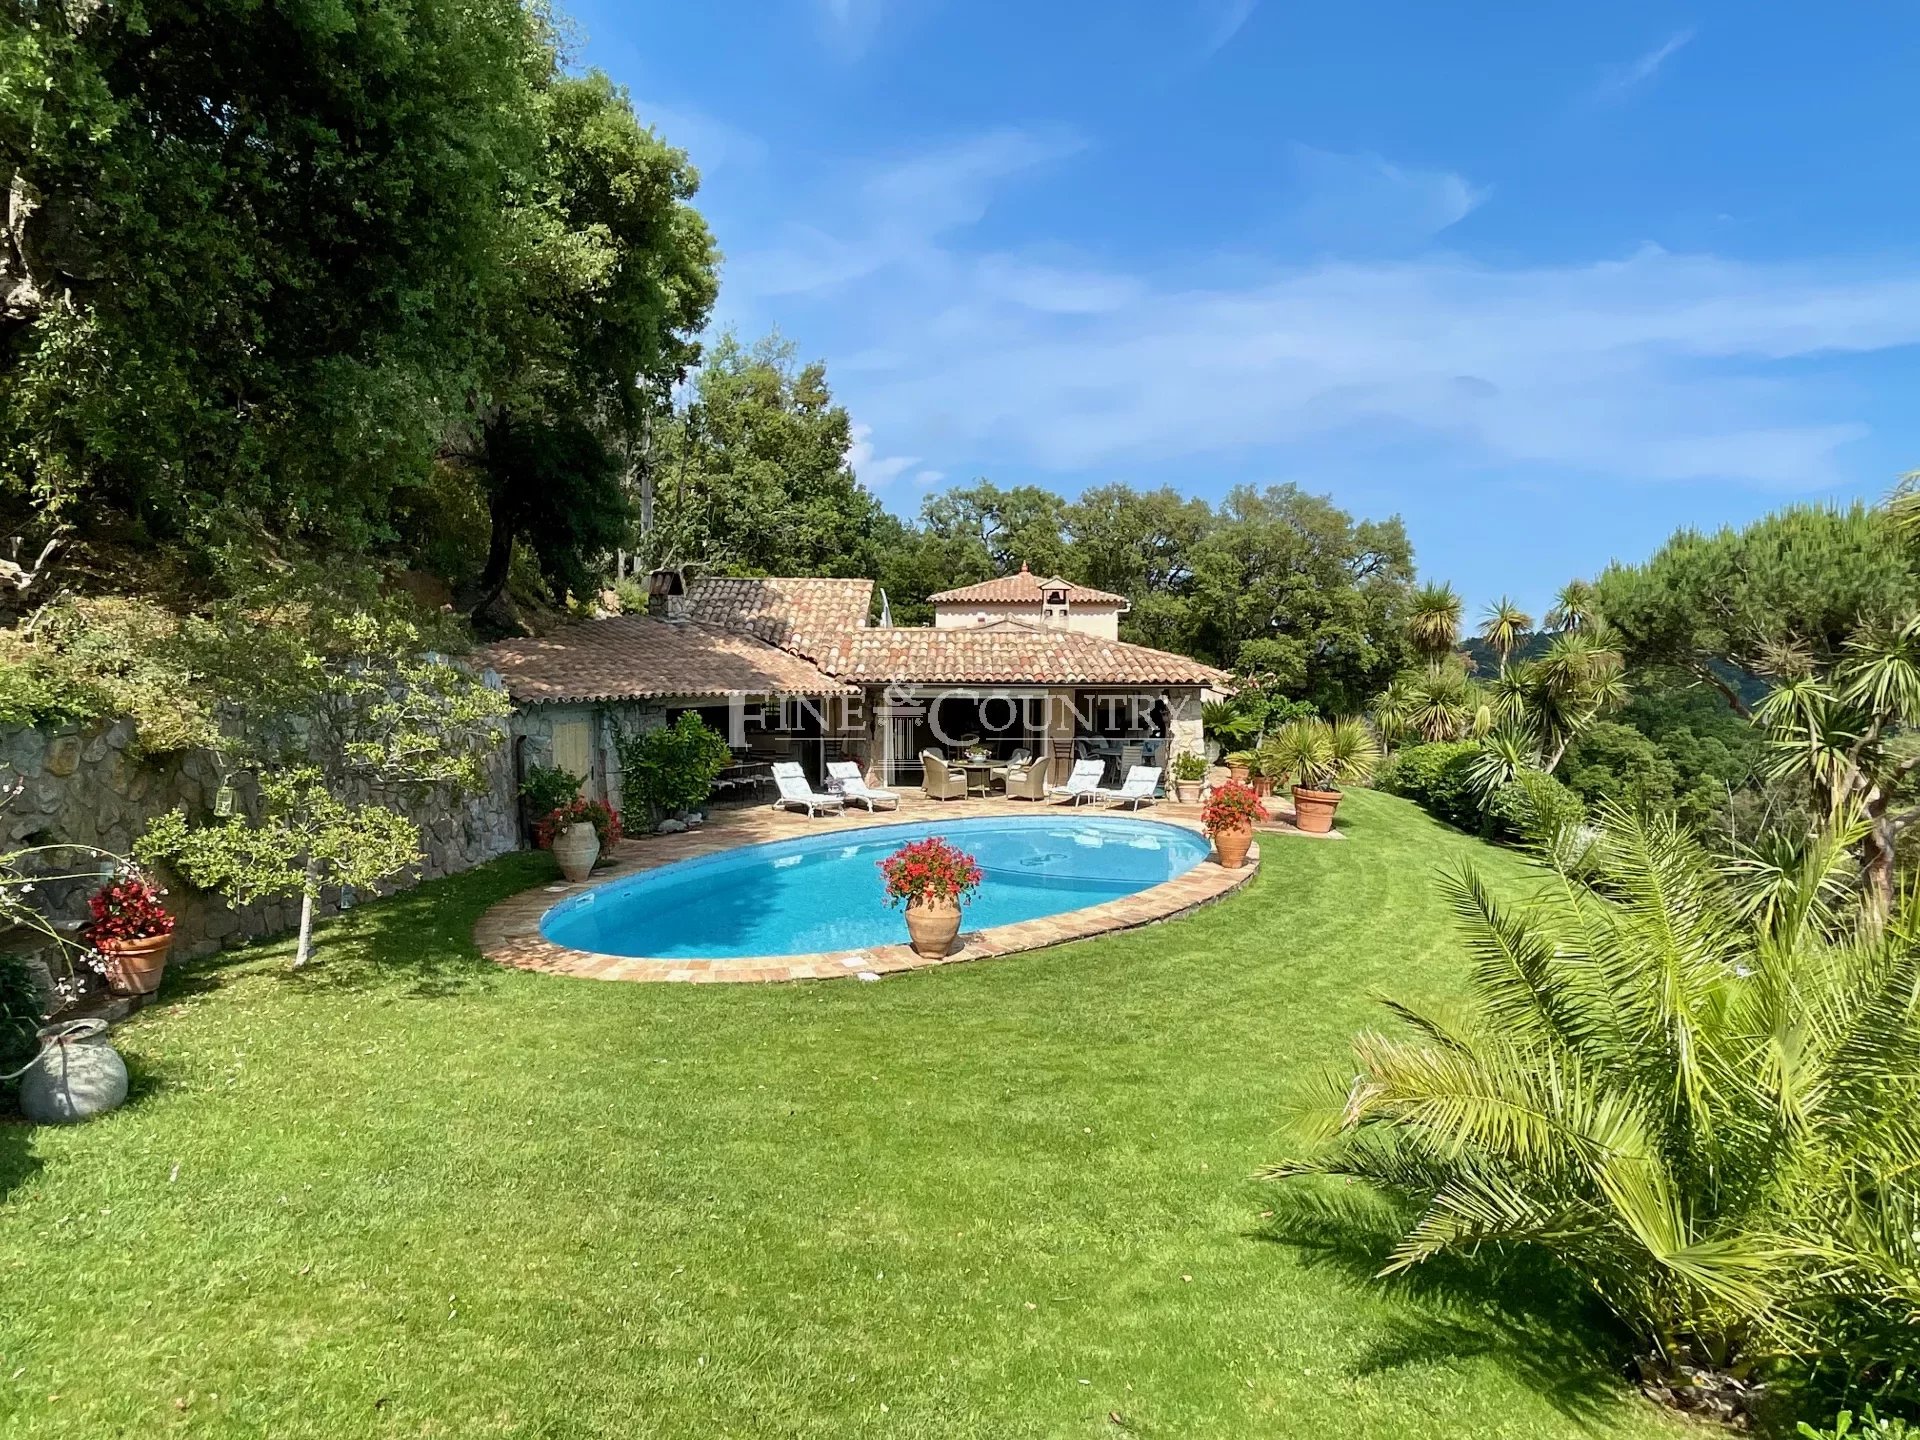 Photo of Villa for sale in La Garde Freinet with panoramic views